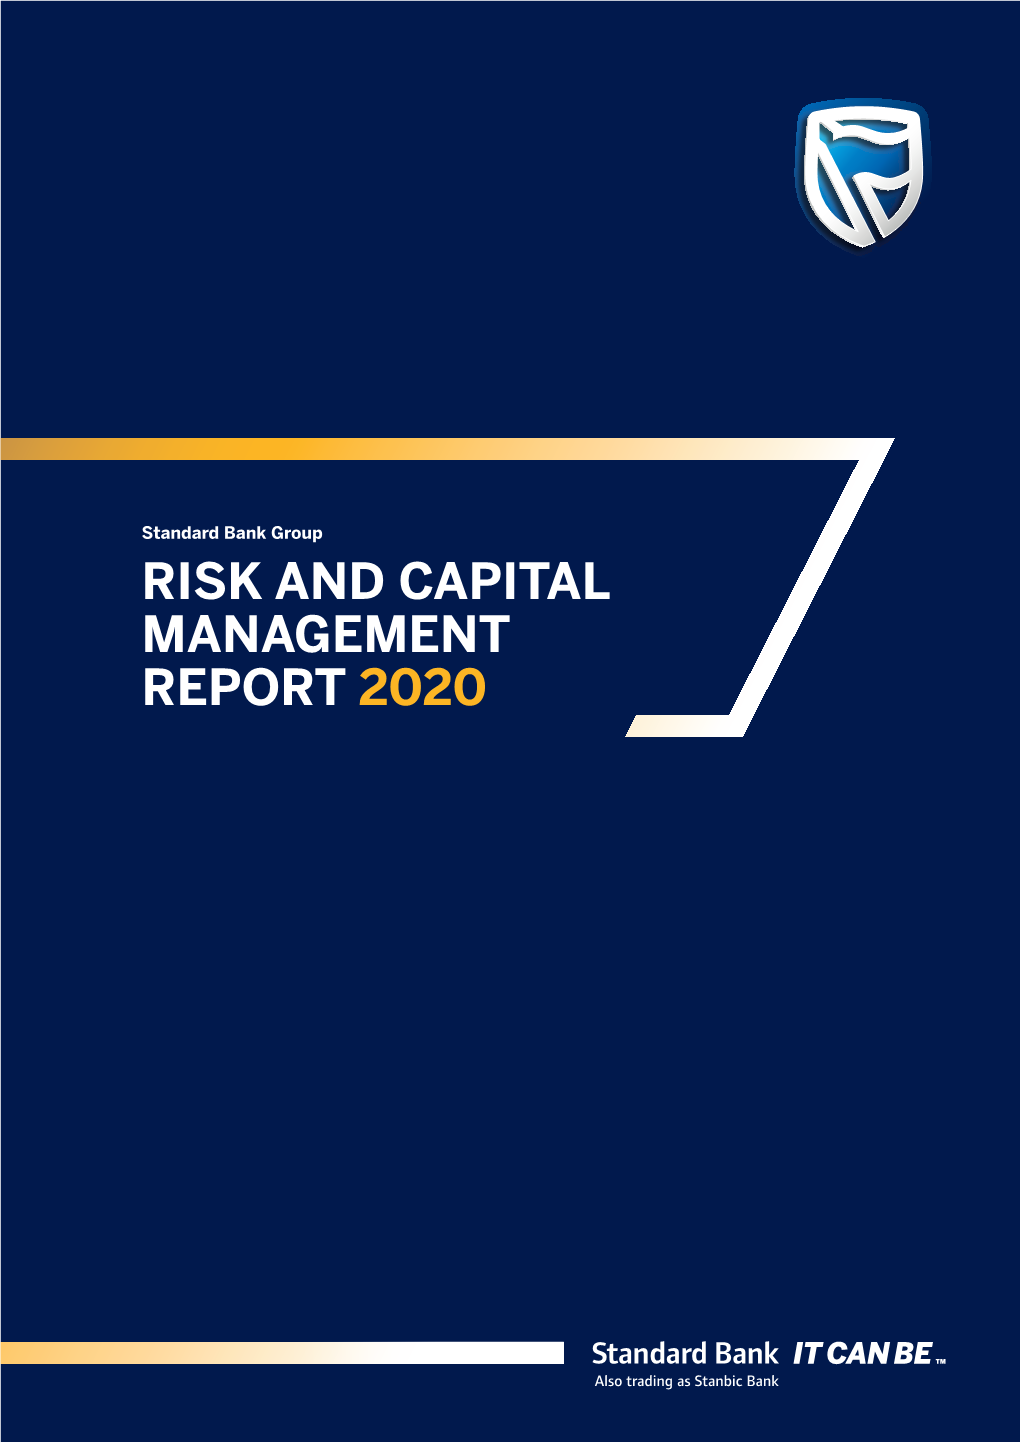 Risk and Capital Management Report 2020 Management Report 2020 D Divider Section Heading Continued